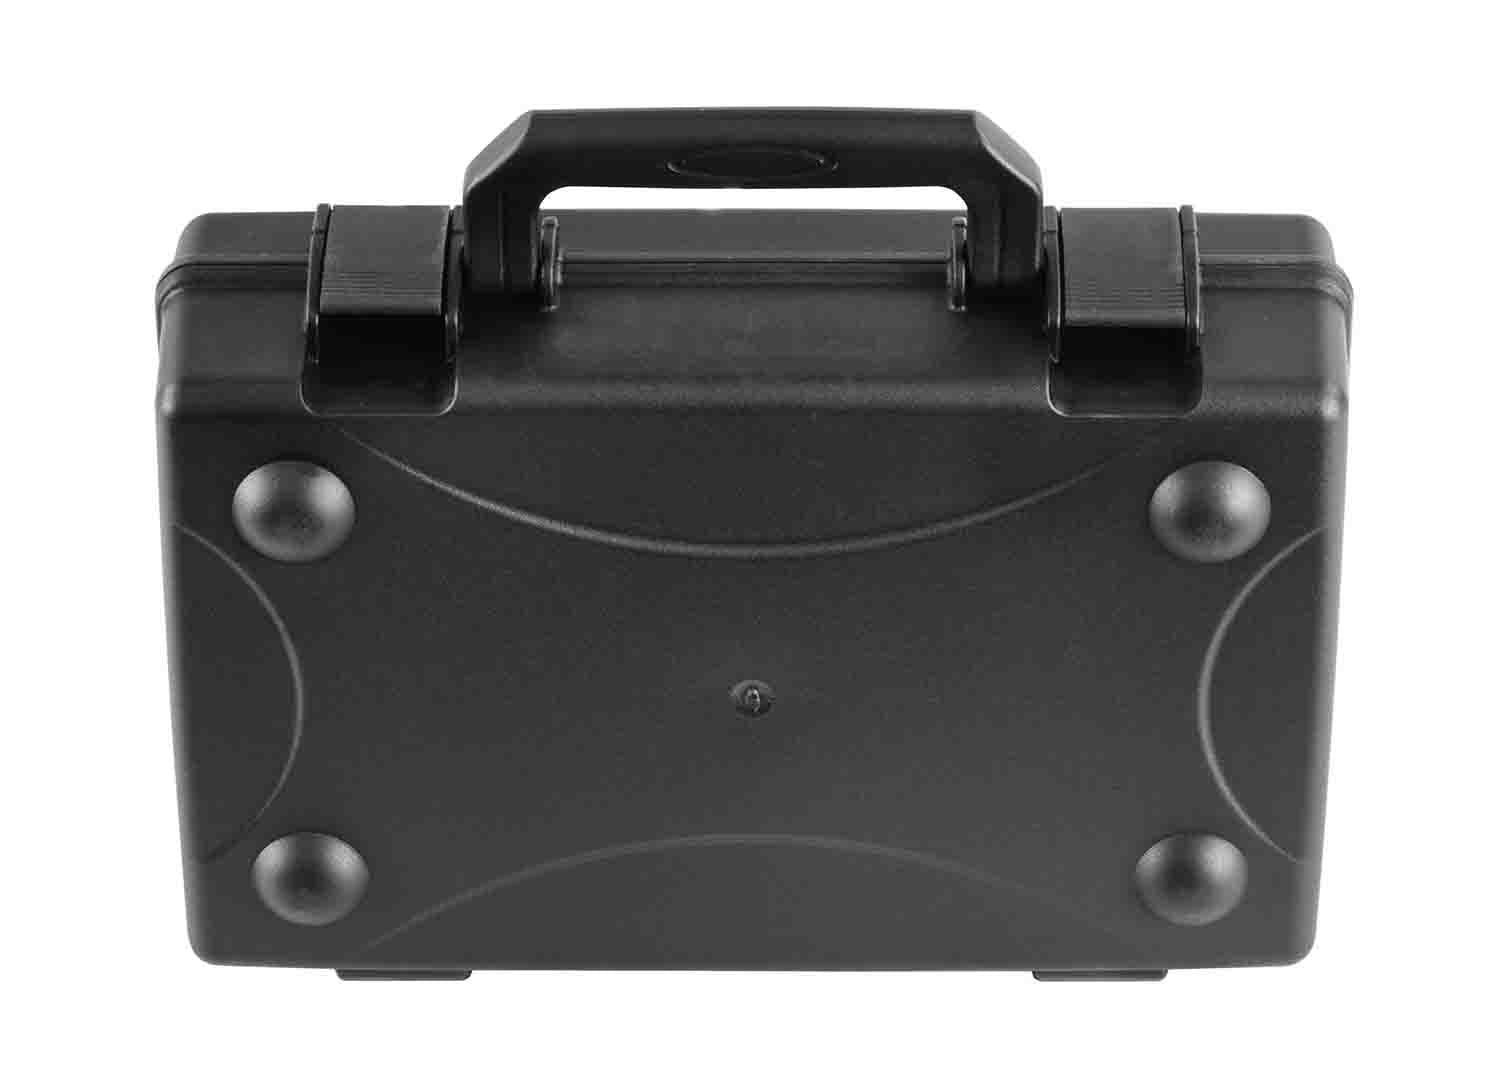 Odyssey VU120703 Vulcan Injection-Molded Utility Case with Pluck Foam - 13 x 8 x 2.25" Interior - Hollywood DJ